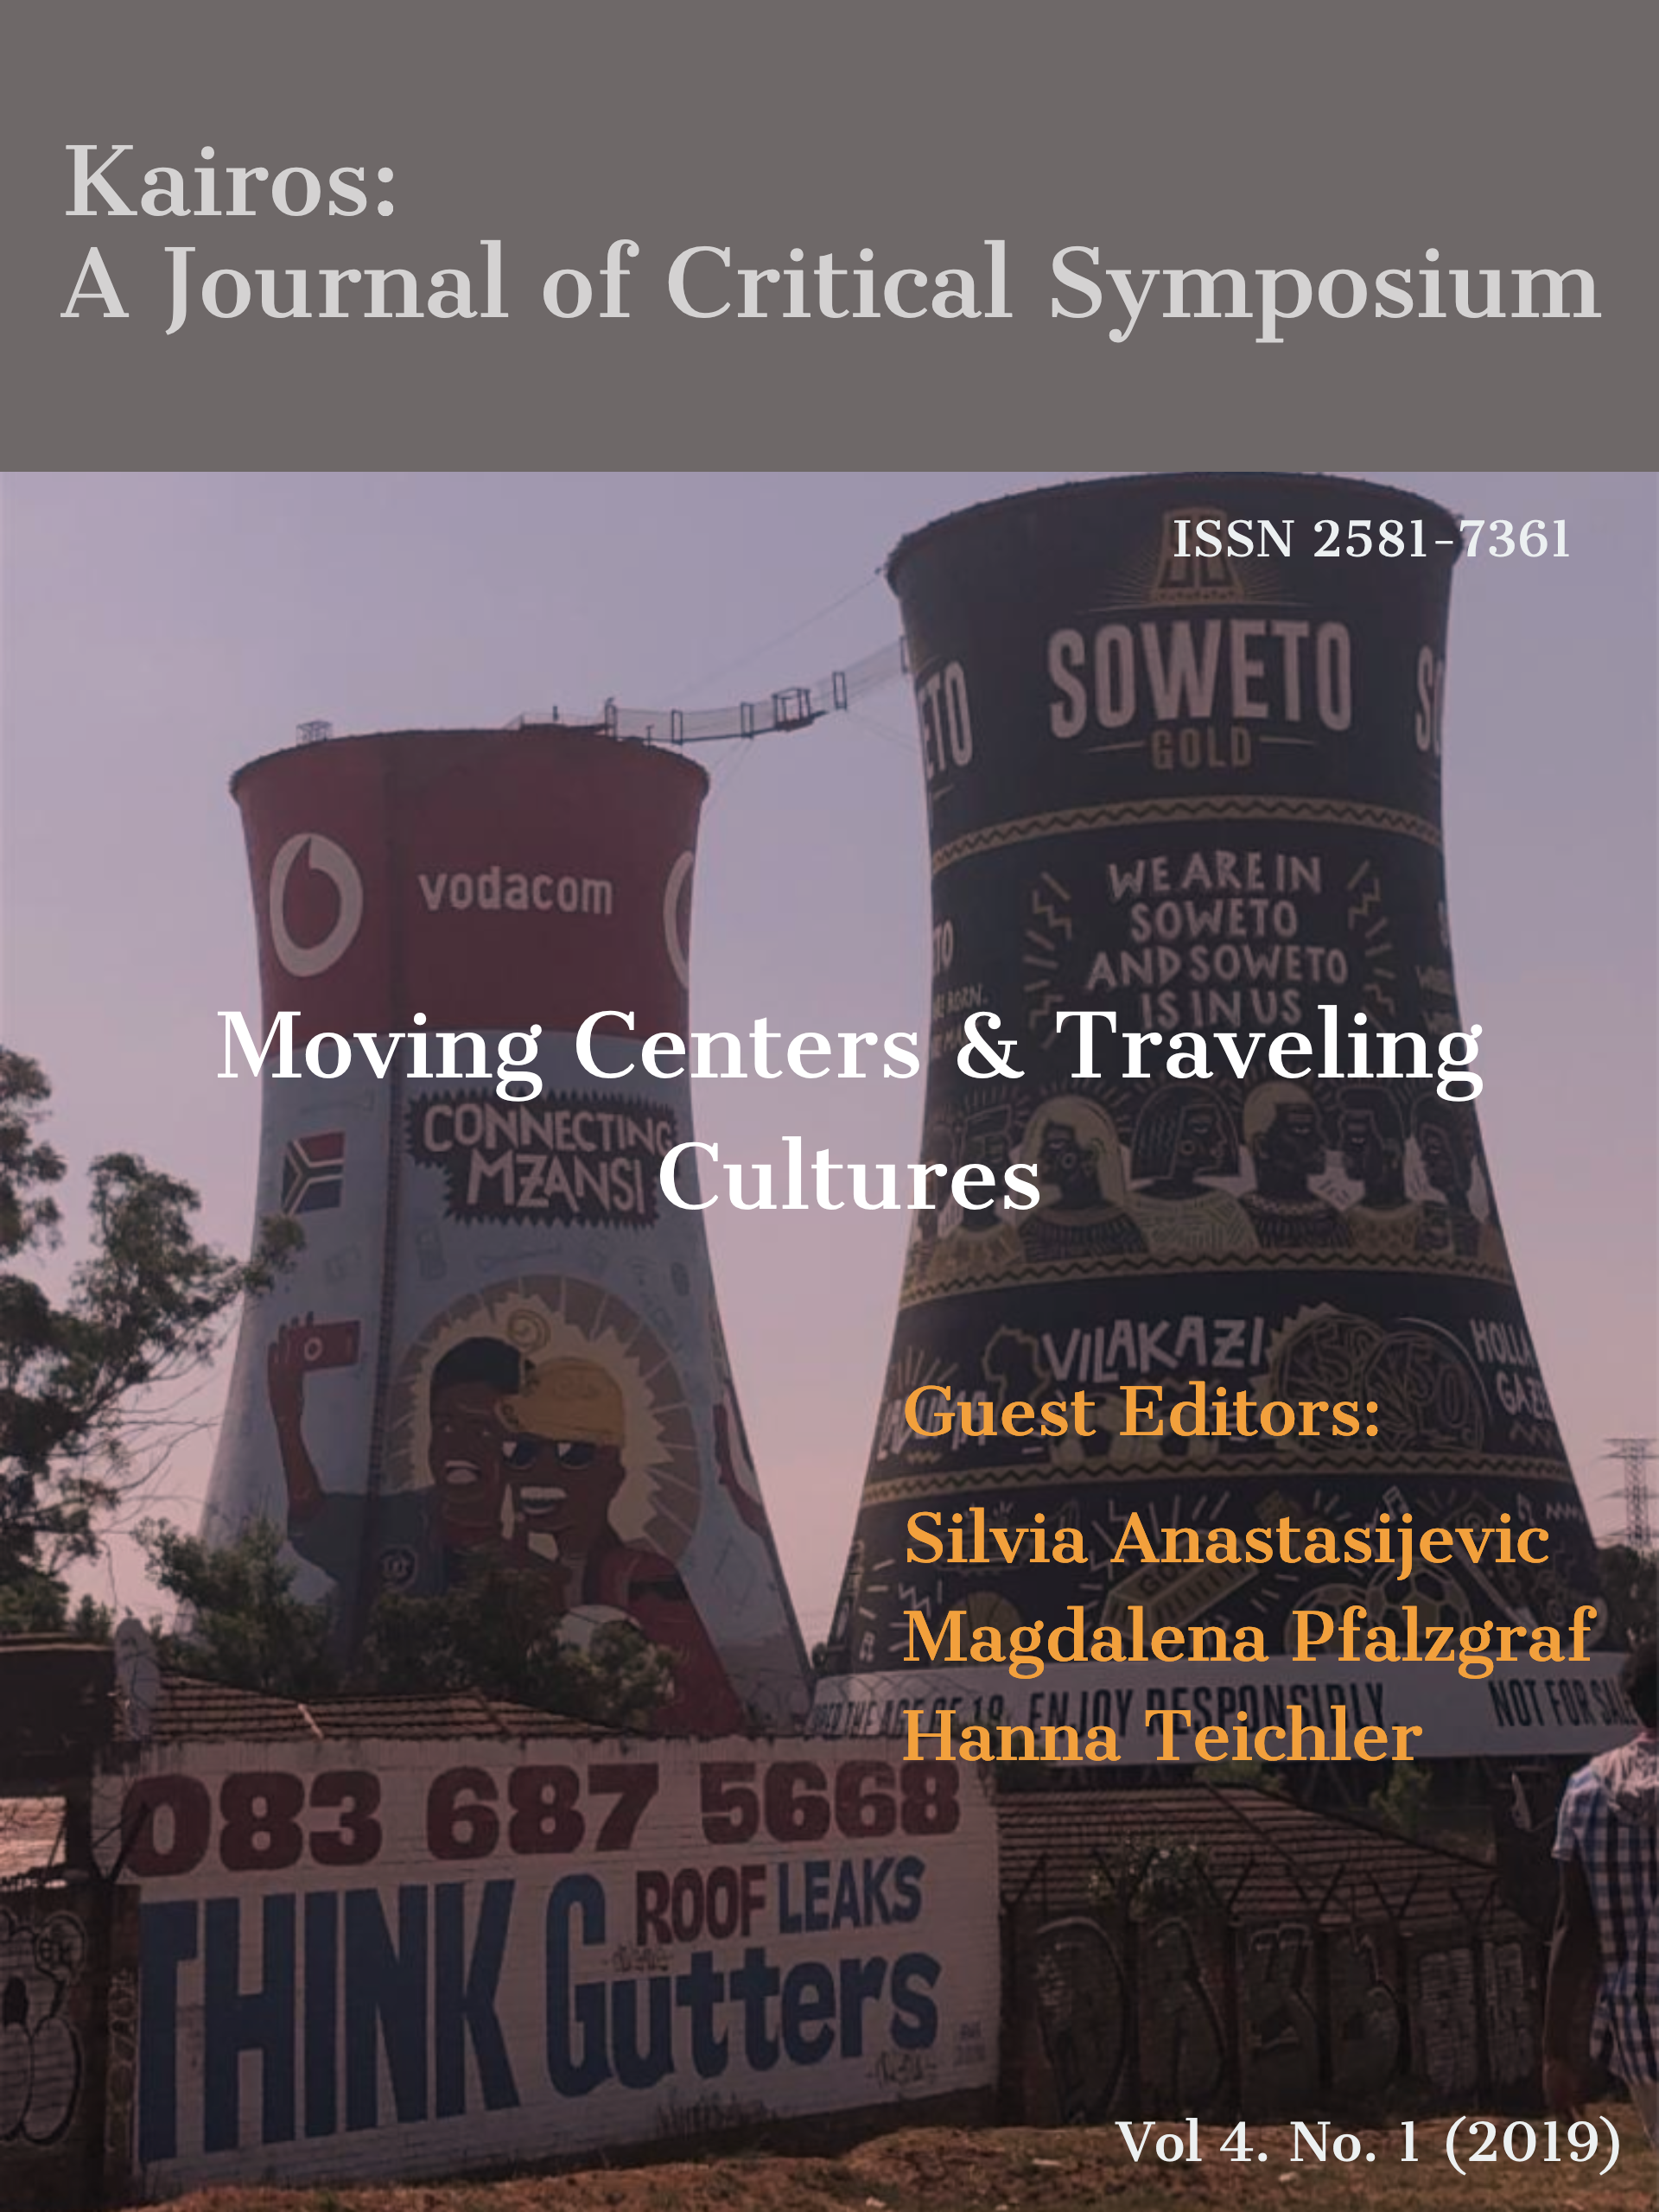 					View Vol. 4 No. 1 (2019): Special Issue: Moving Centers & Traveling Cultures
				